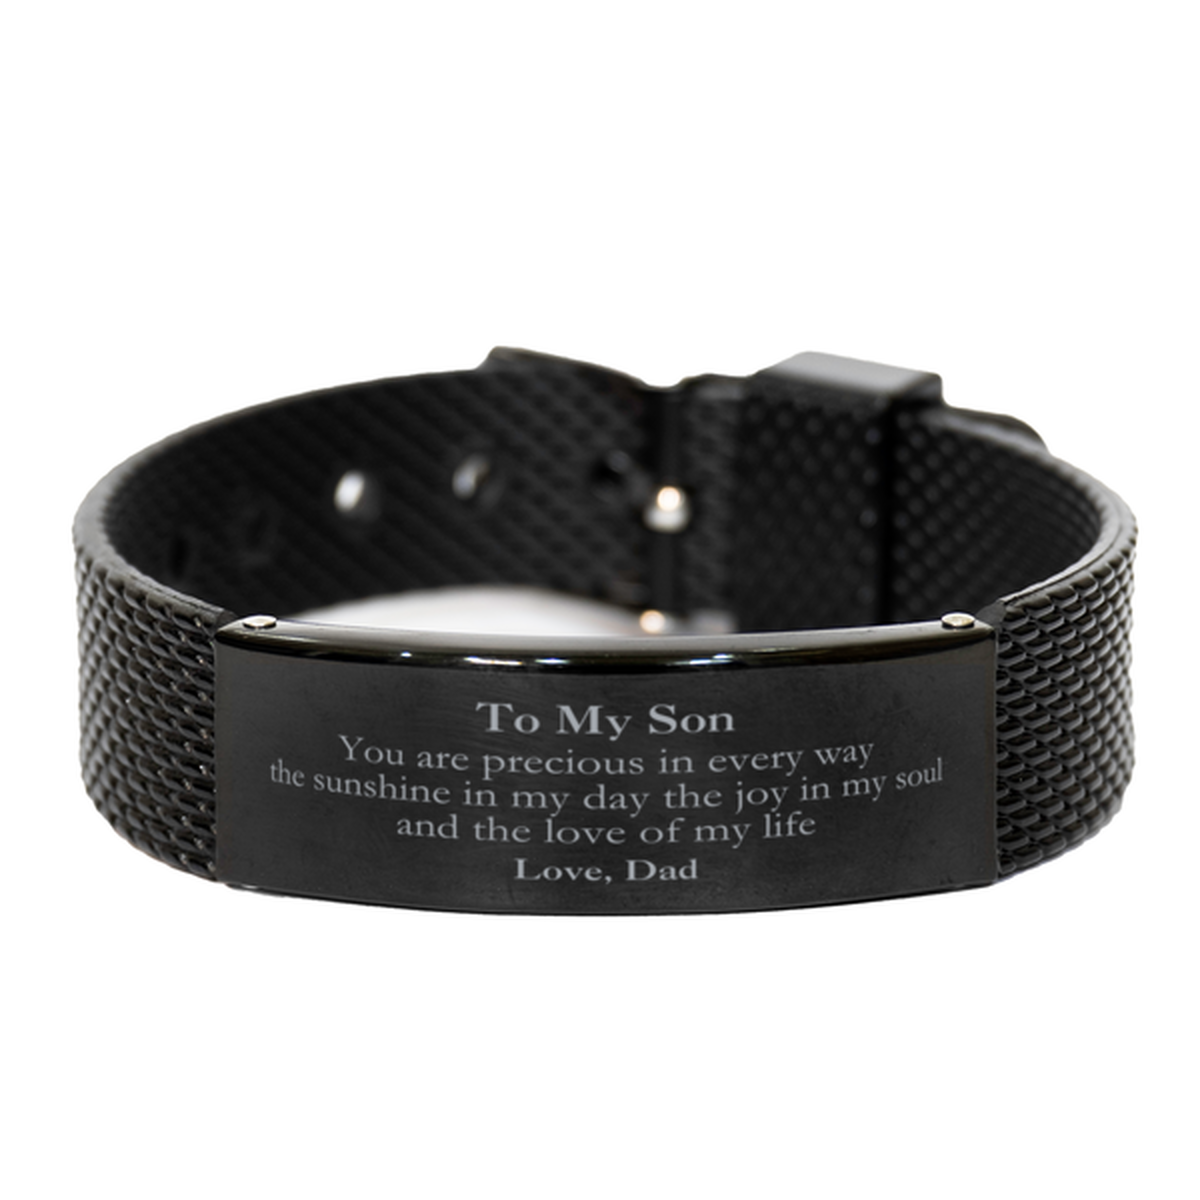 Graduation Gifts for Son Black Shark Mesh Bracelet Present from Dad, Christmas Son Birthday Gifts Son You are precious in every way the sunshine in my day. Love, Dad